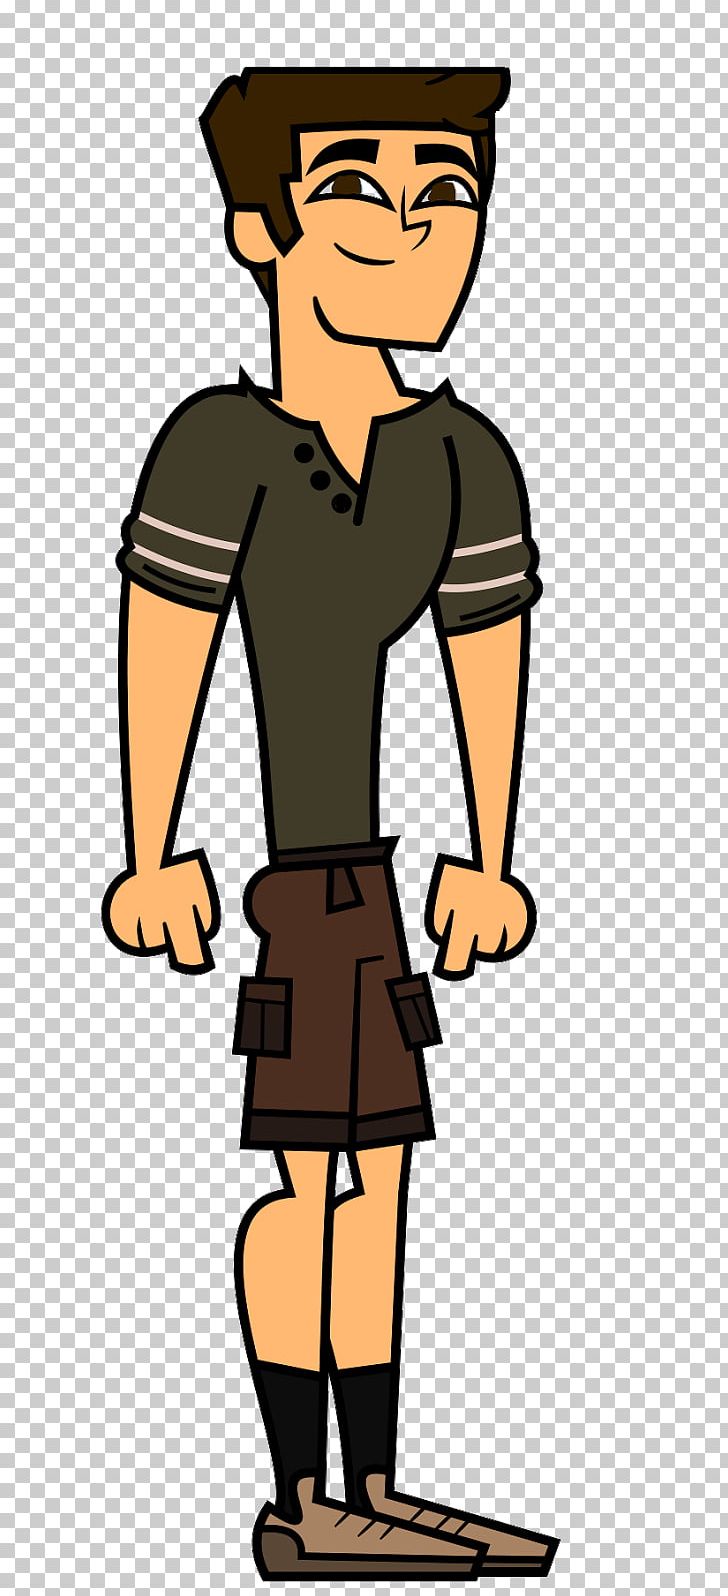 Leshawna Total Drama Island Total Drama: Revenge Of The Island Total Drama Action Film PNG, Clipart, Artwork, Boy, Cartoon, Cartoon Network, Character Free PNG Download